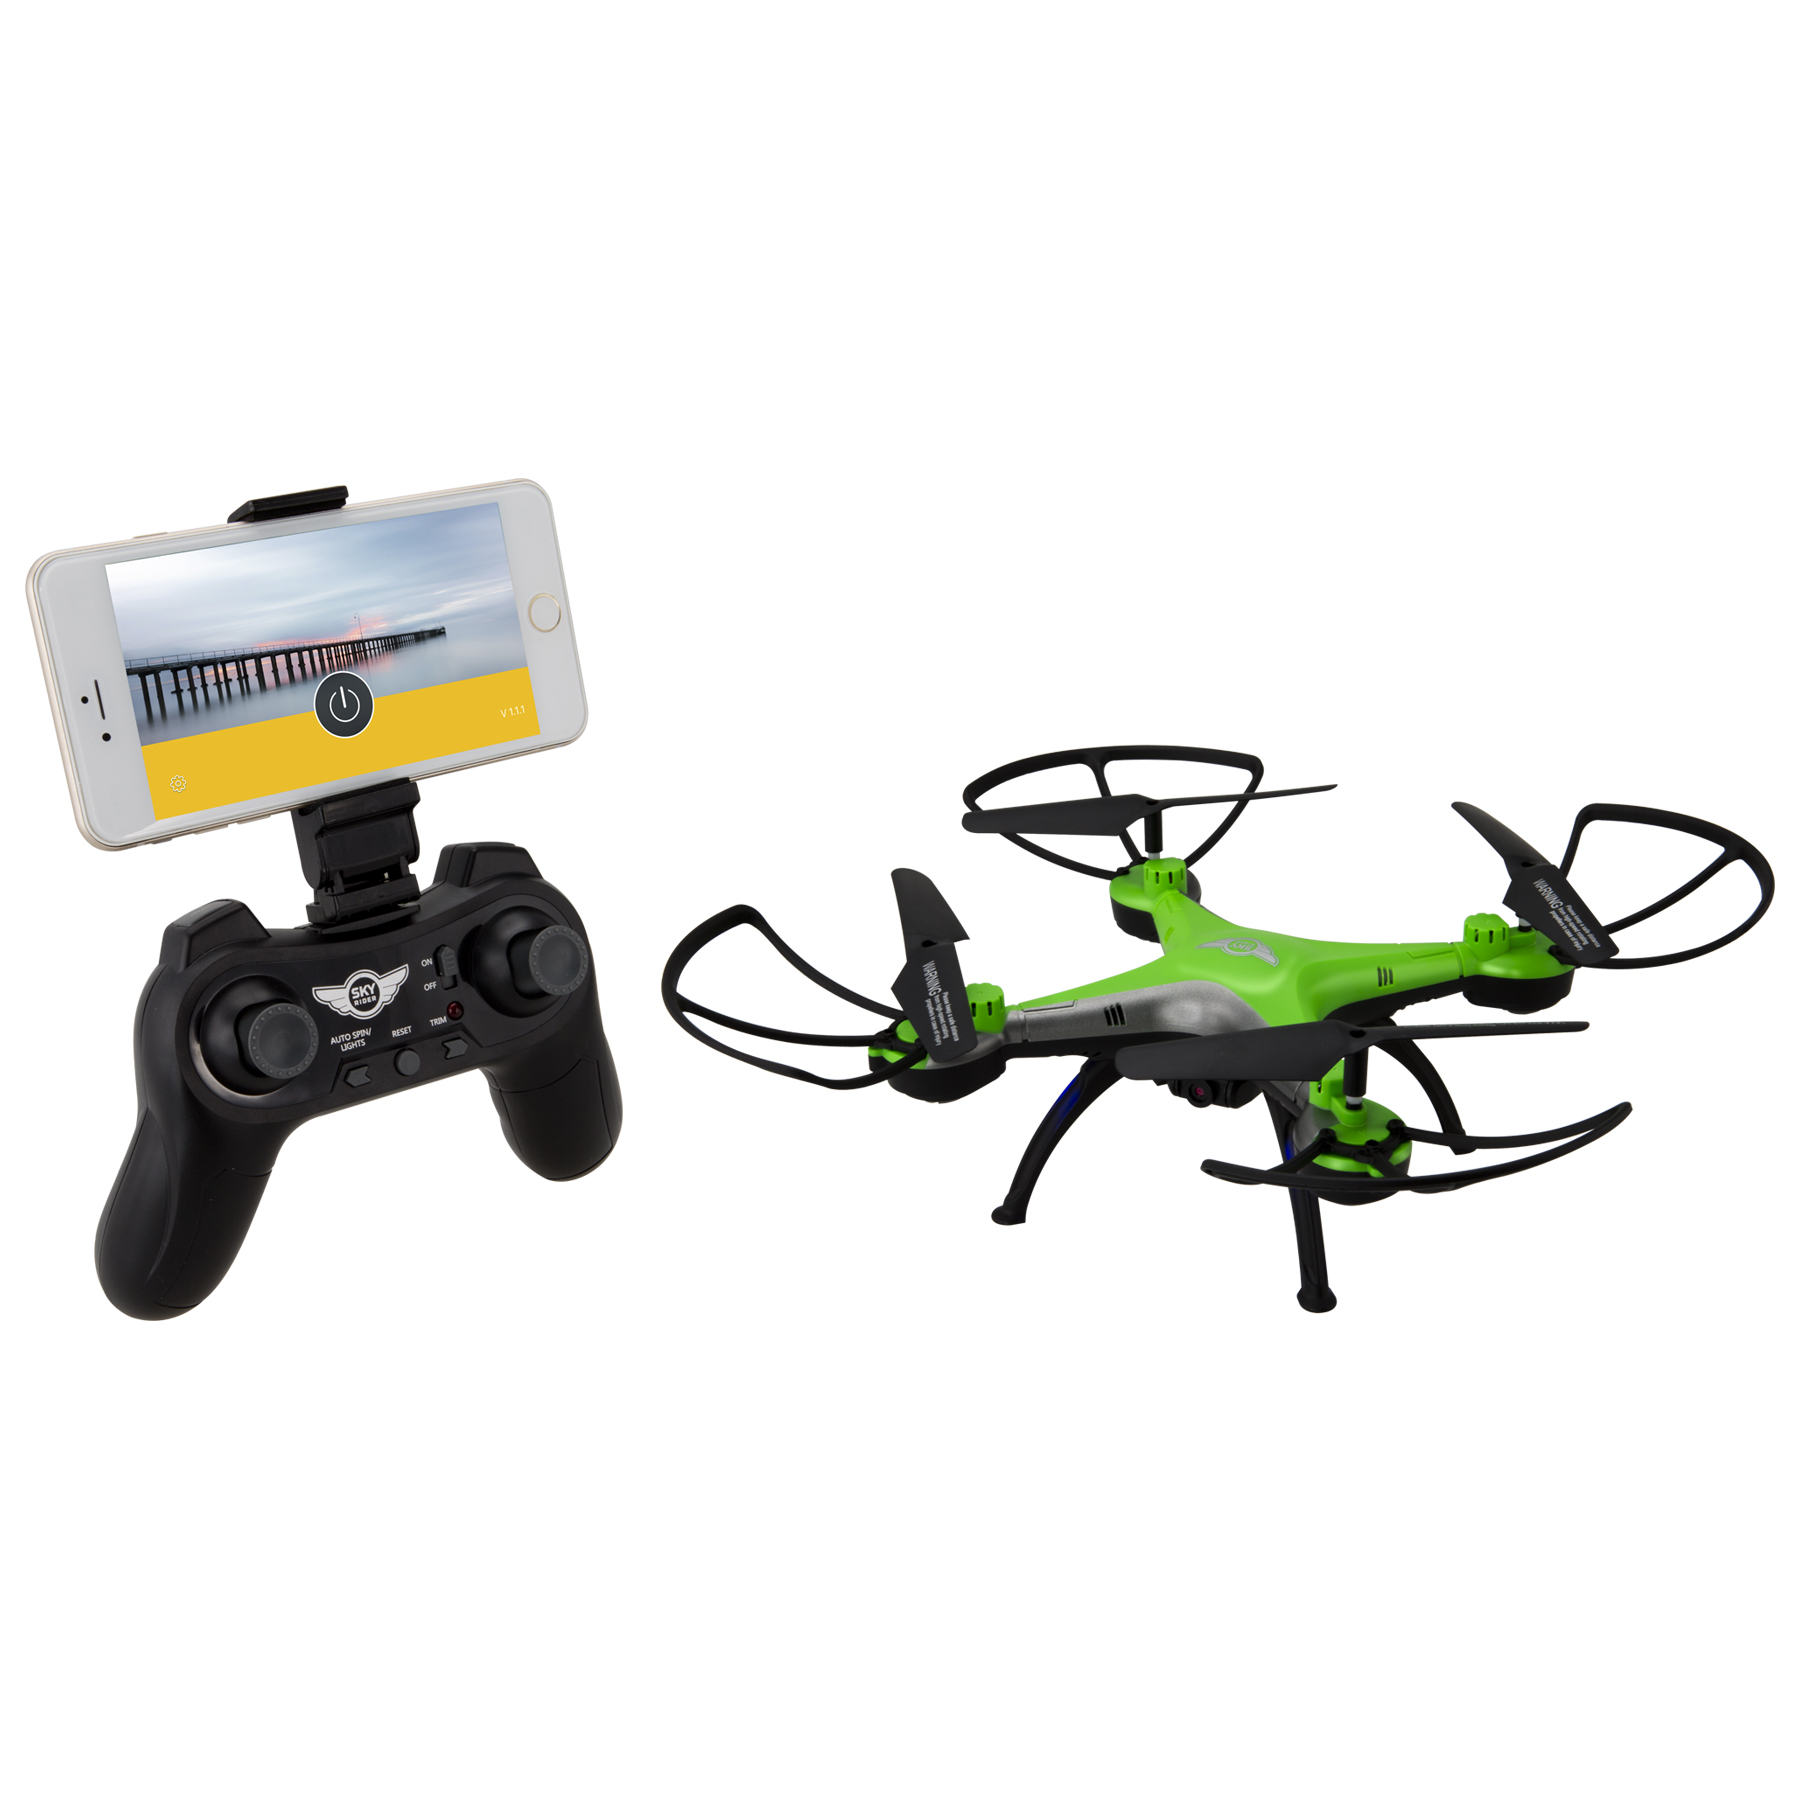 Sky Rider Thunderbird 2 Quadcopter Drone with Wi-Fi Camera, DRW330, Green - image 3 of 5